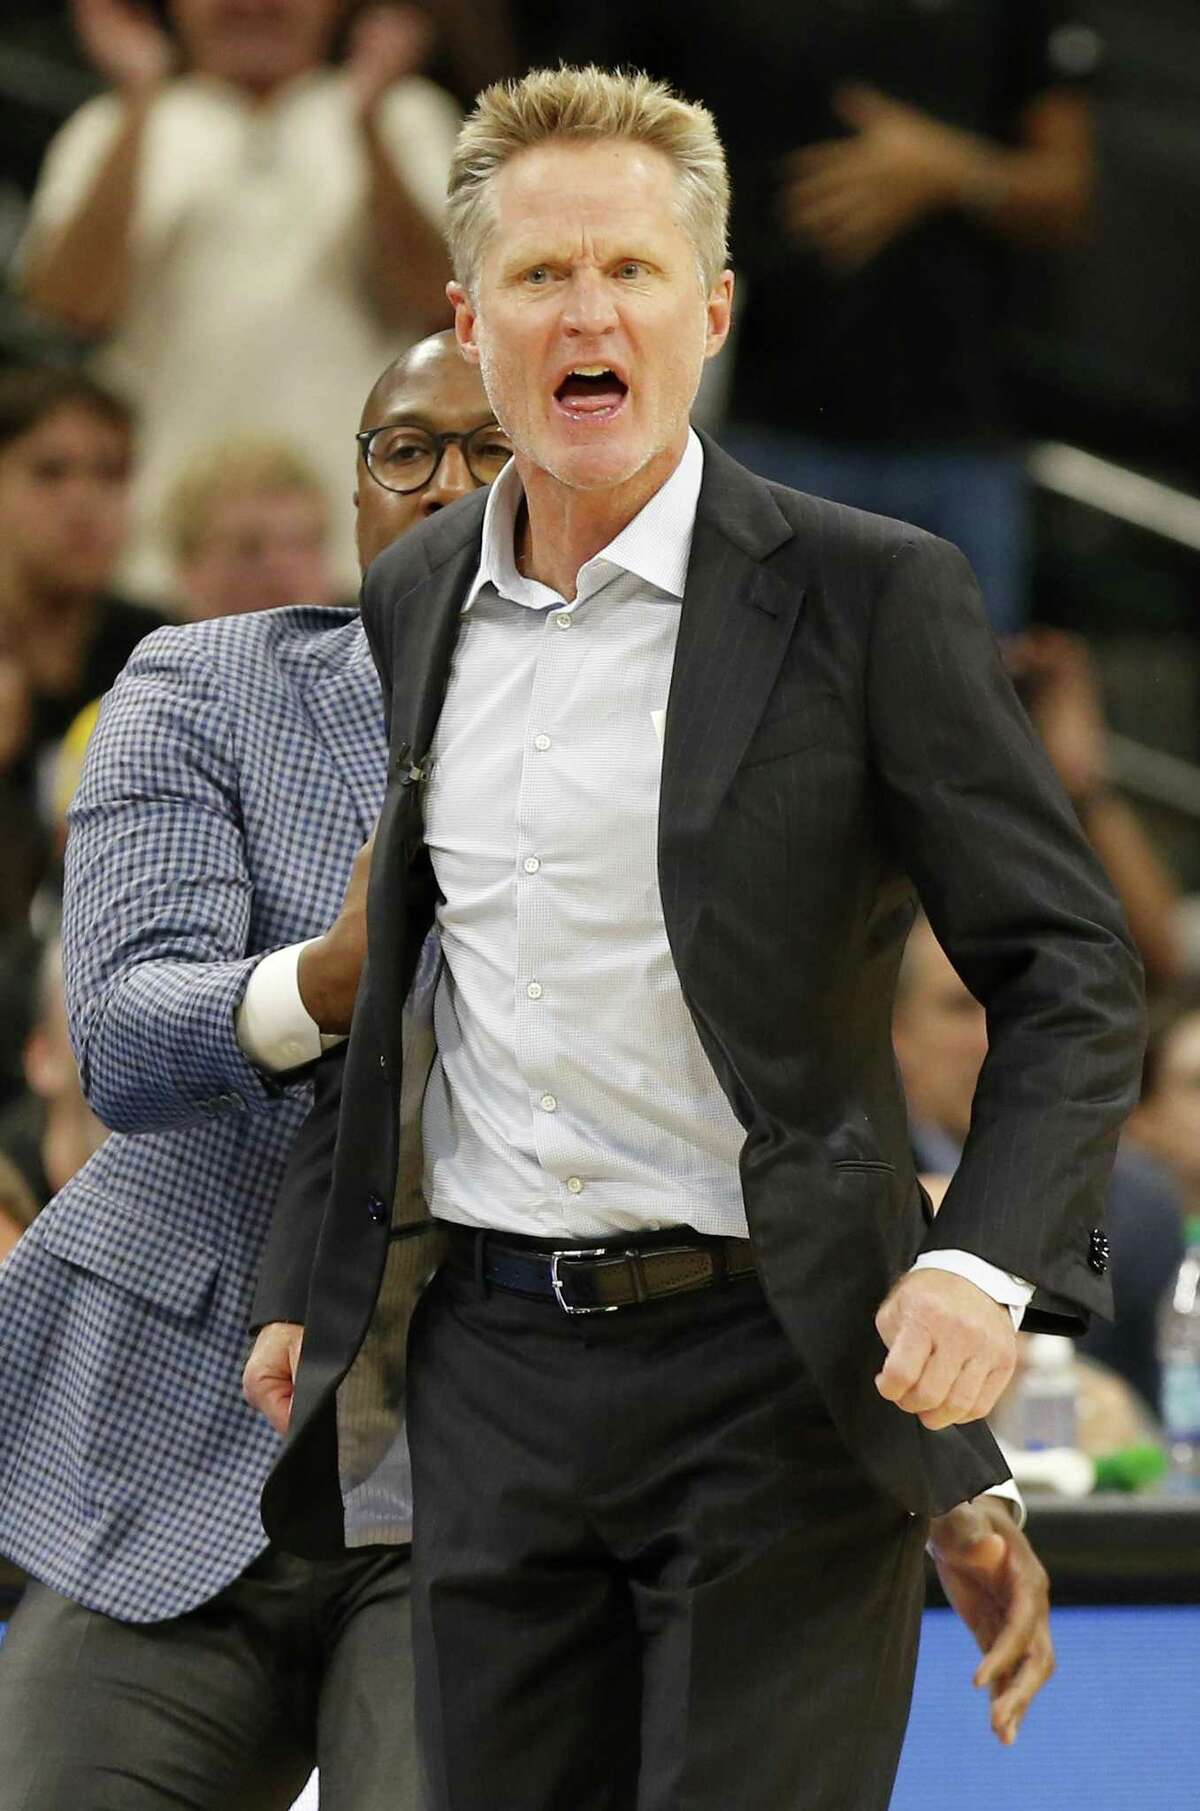 Golden State Warriors assistant coach Mike Brown (left) holds back head coach Steve Kerr as he reacts after a play during first half action against the San Antonio Spurs Thursday Nov. 2, 2017 at the AT&T Center. Kerr was given a technical.